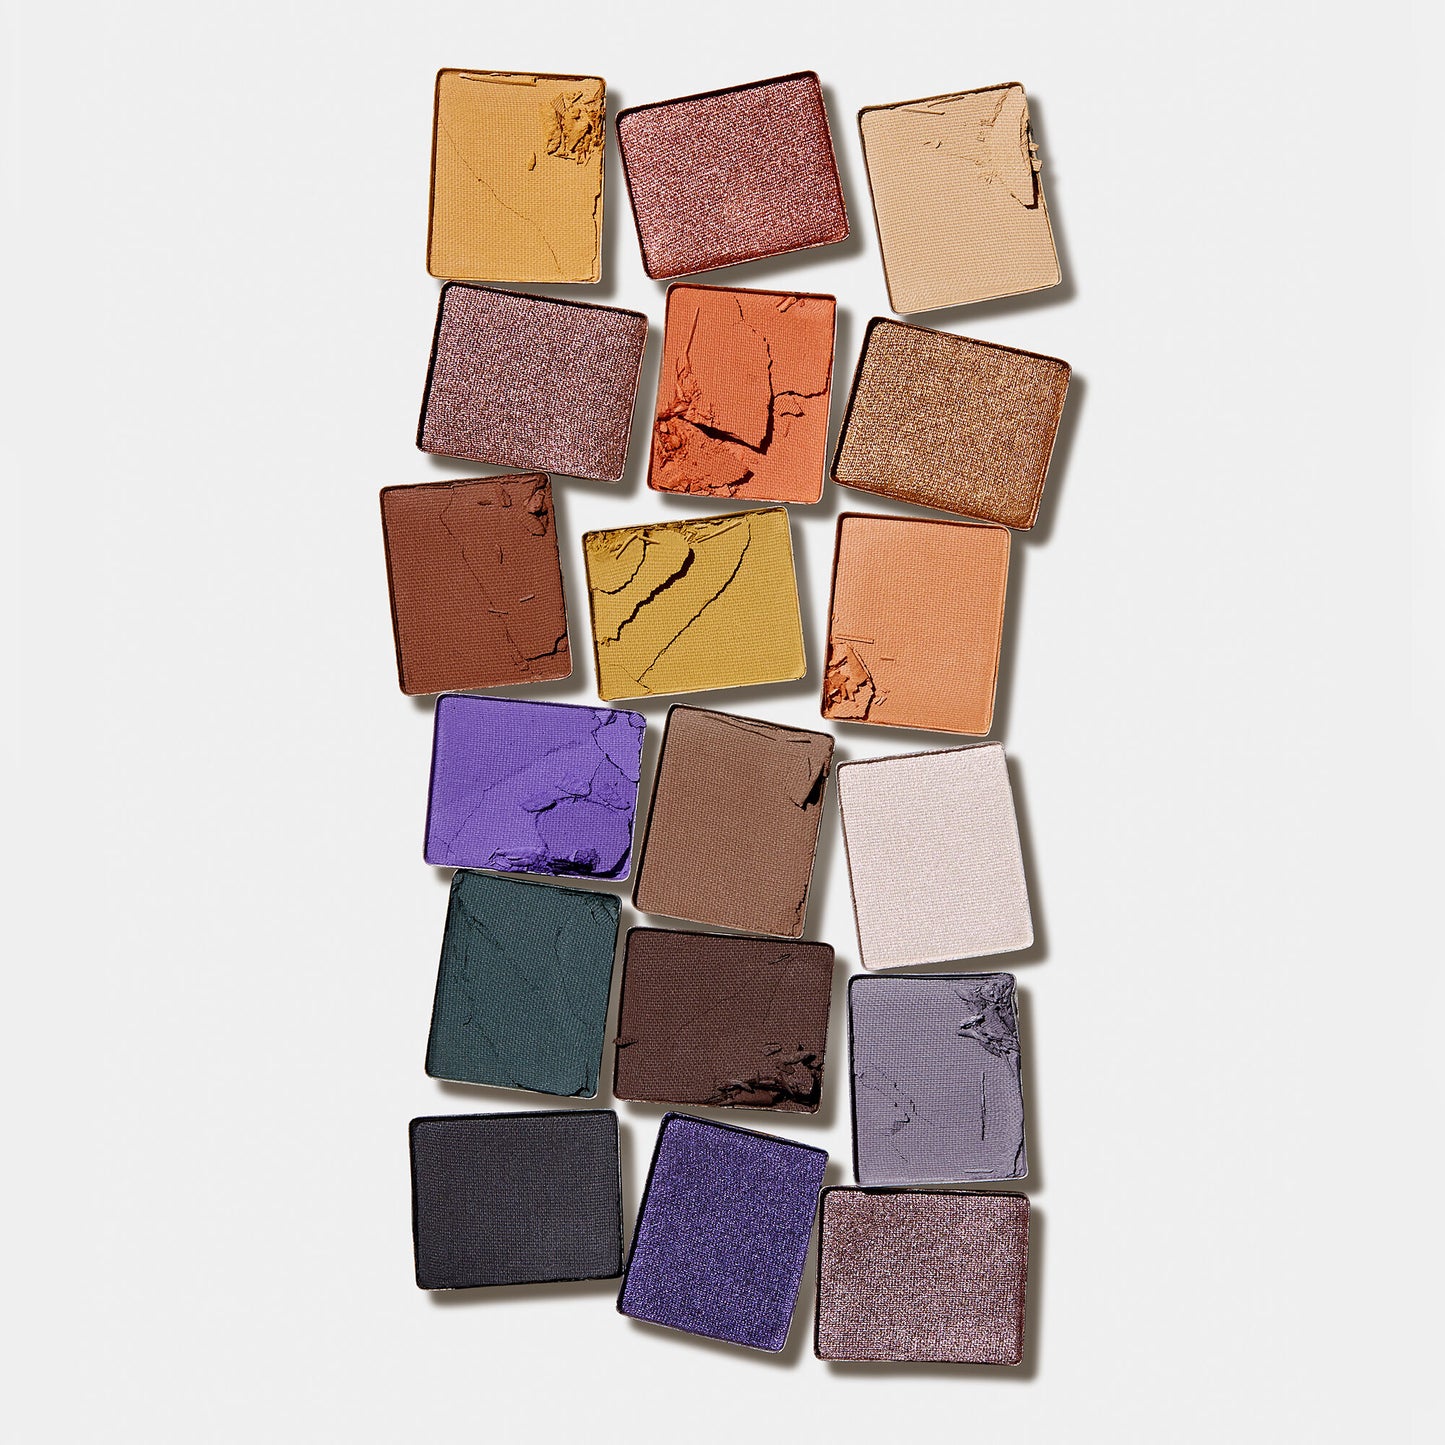 e.l.f. Opposites Attract Eyeshadow Palette